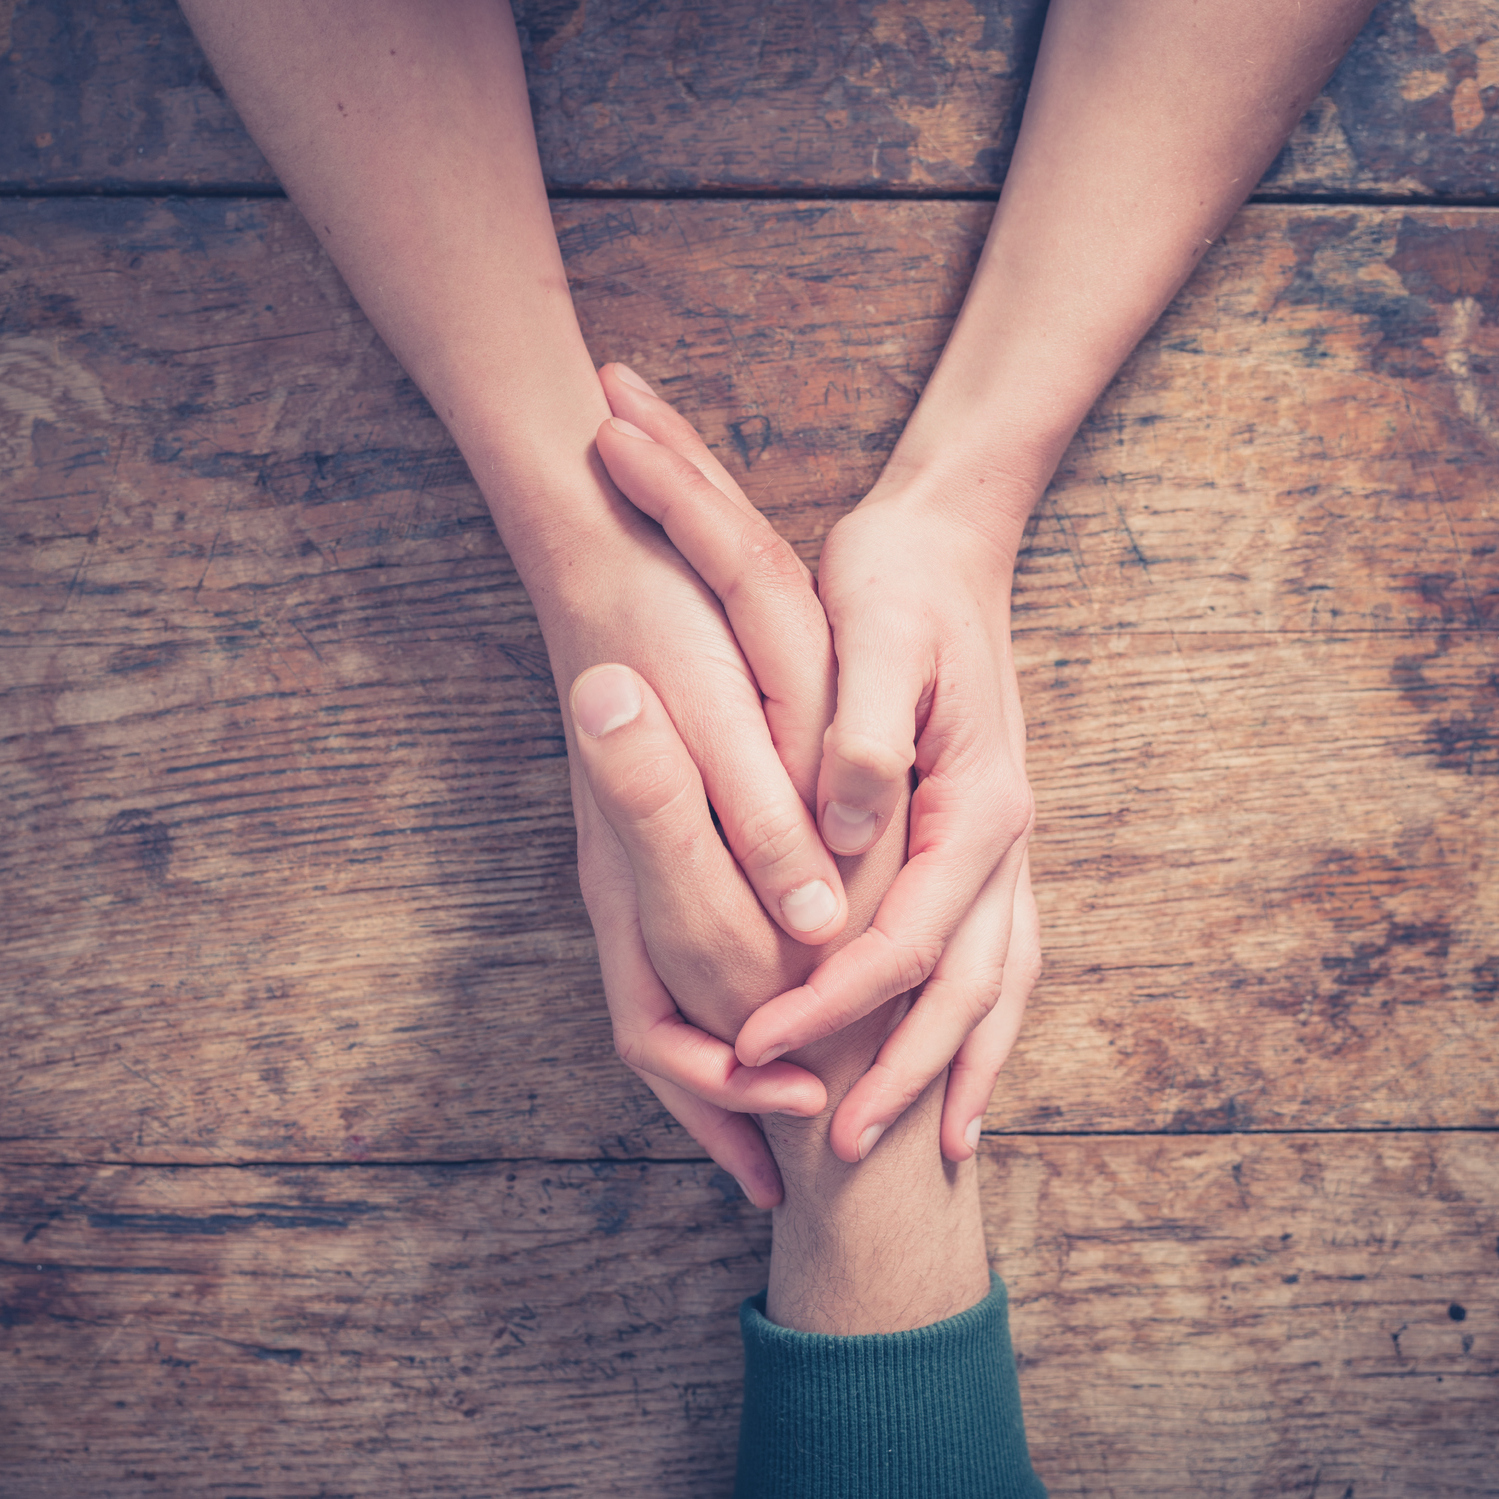 a person holding their friend's hand in support